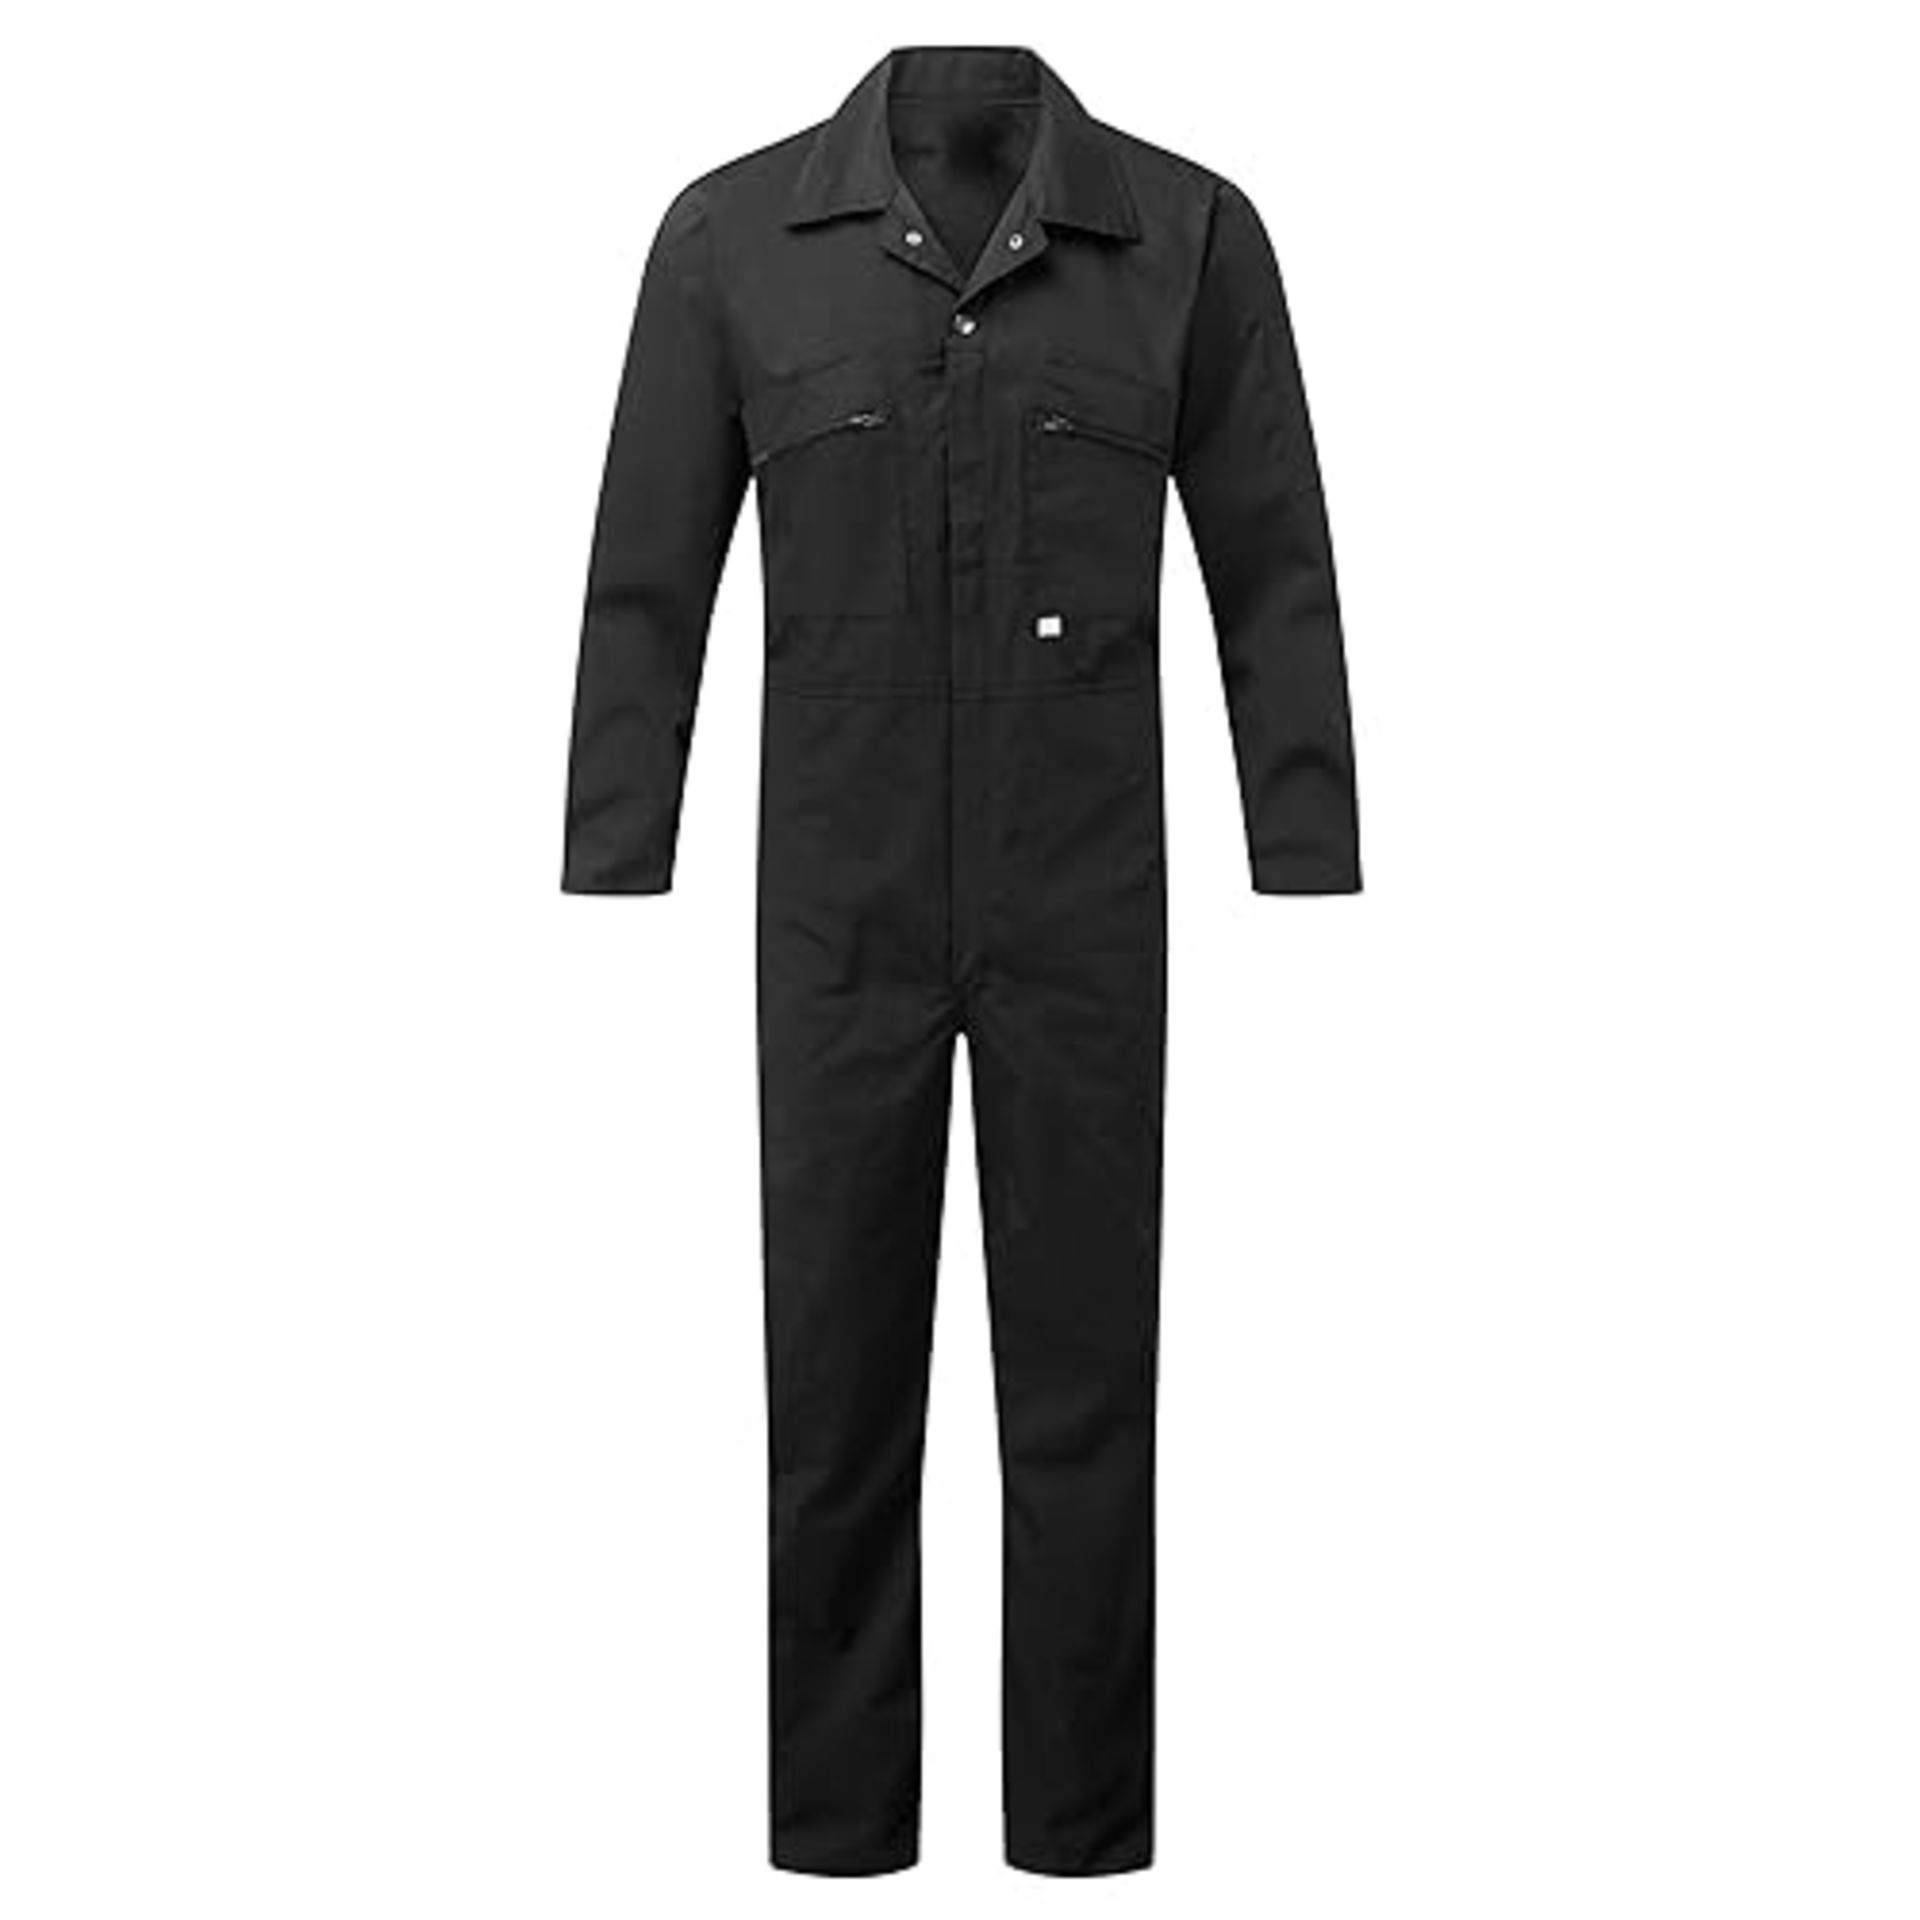 Fort - Zip Front Coverall - Black Coveralls - 50" - Handy Pockets - Durable Coveralls - Overalls...